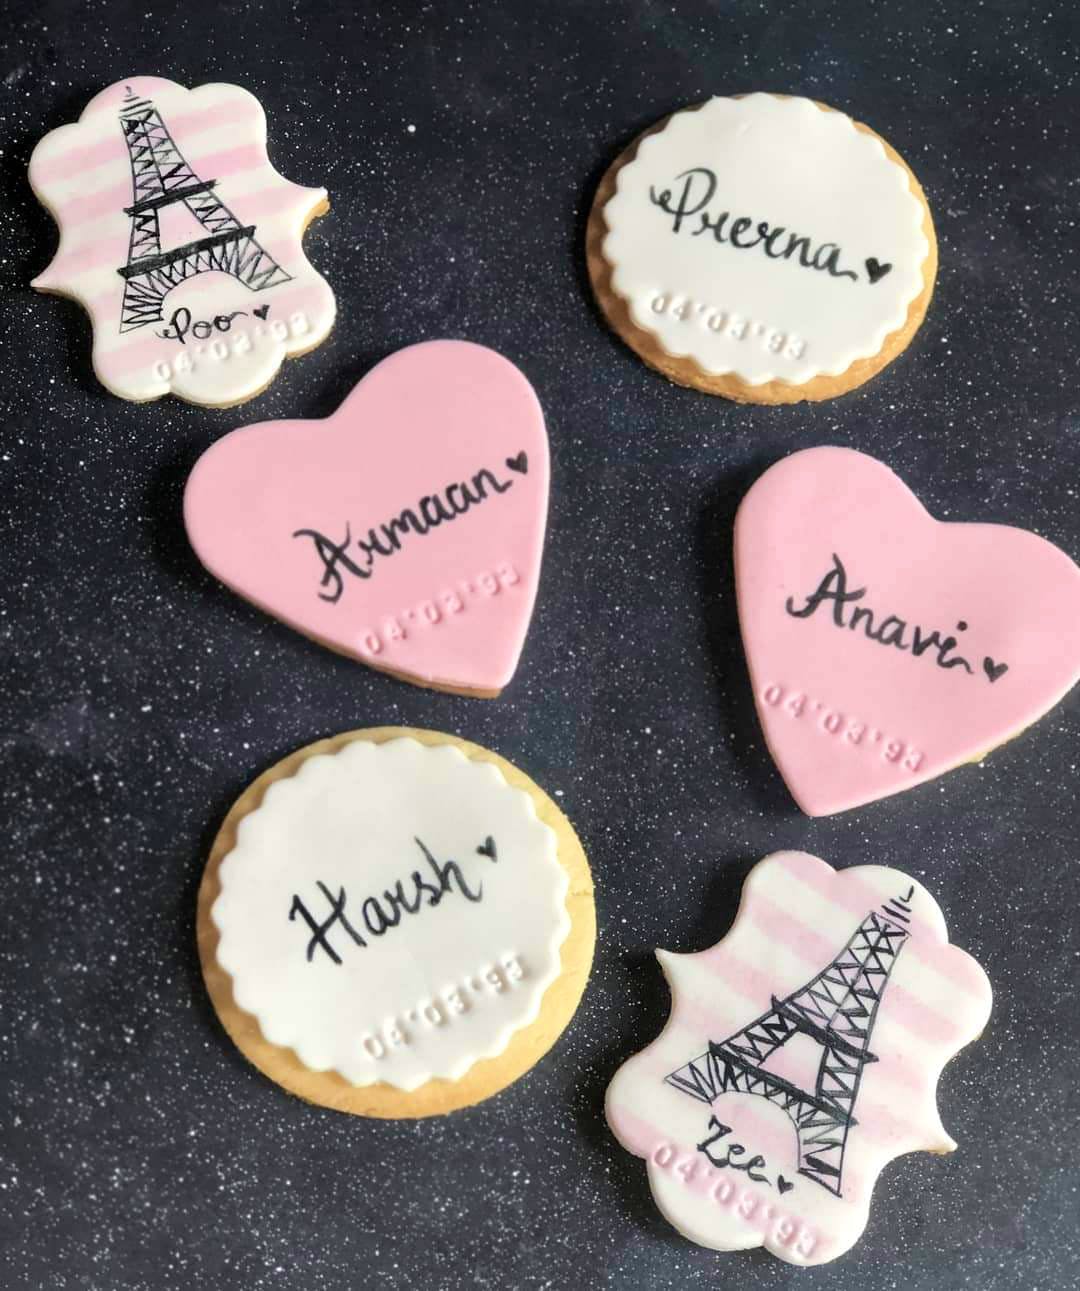 Pink,Icing,Heart,Finger food,Sweetness,Font,Snack,Label,Cookie,Sweethearts